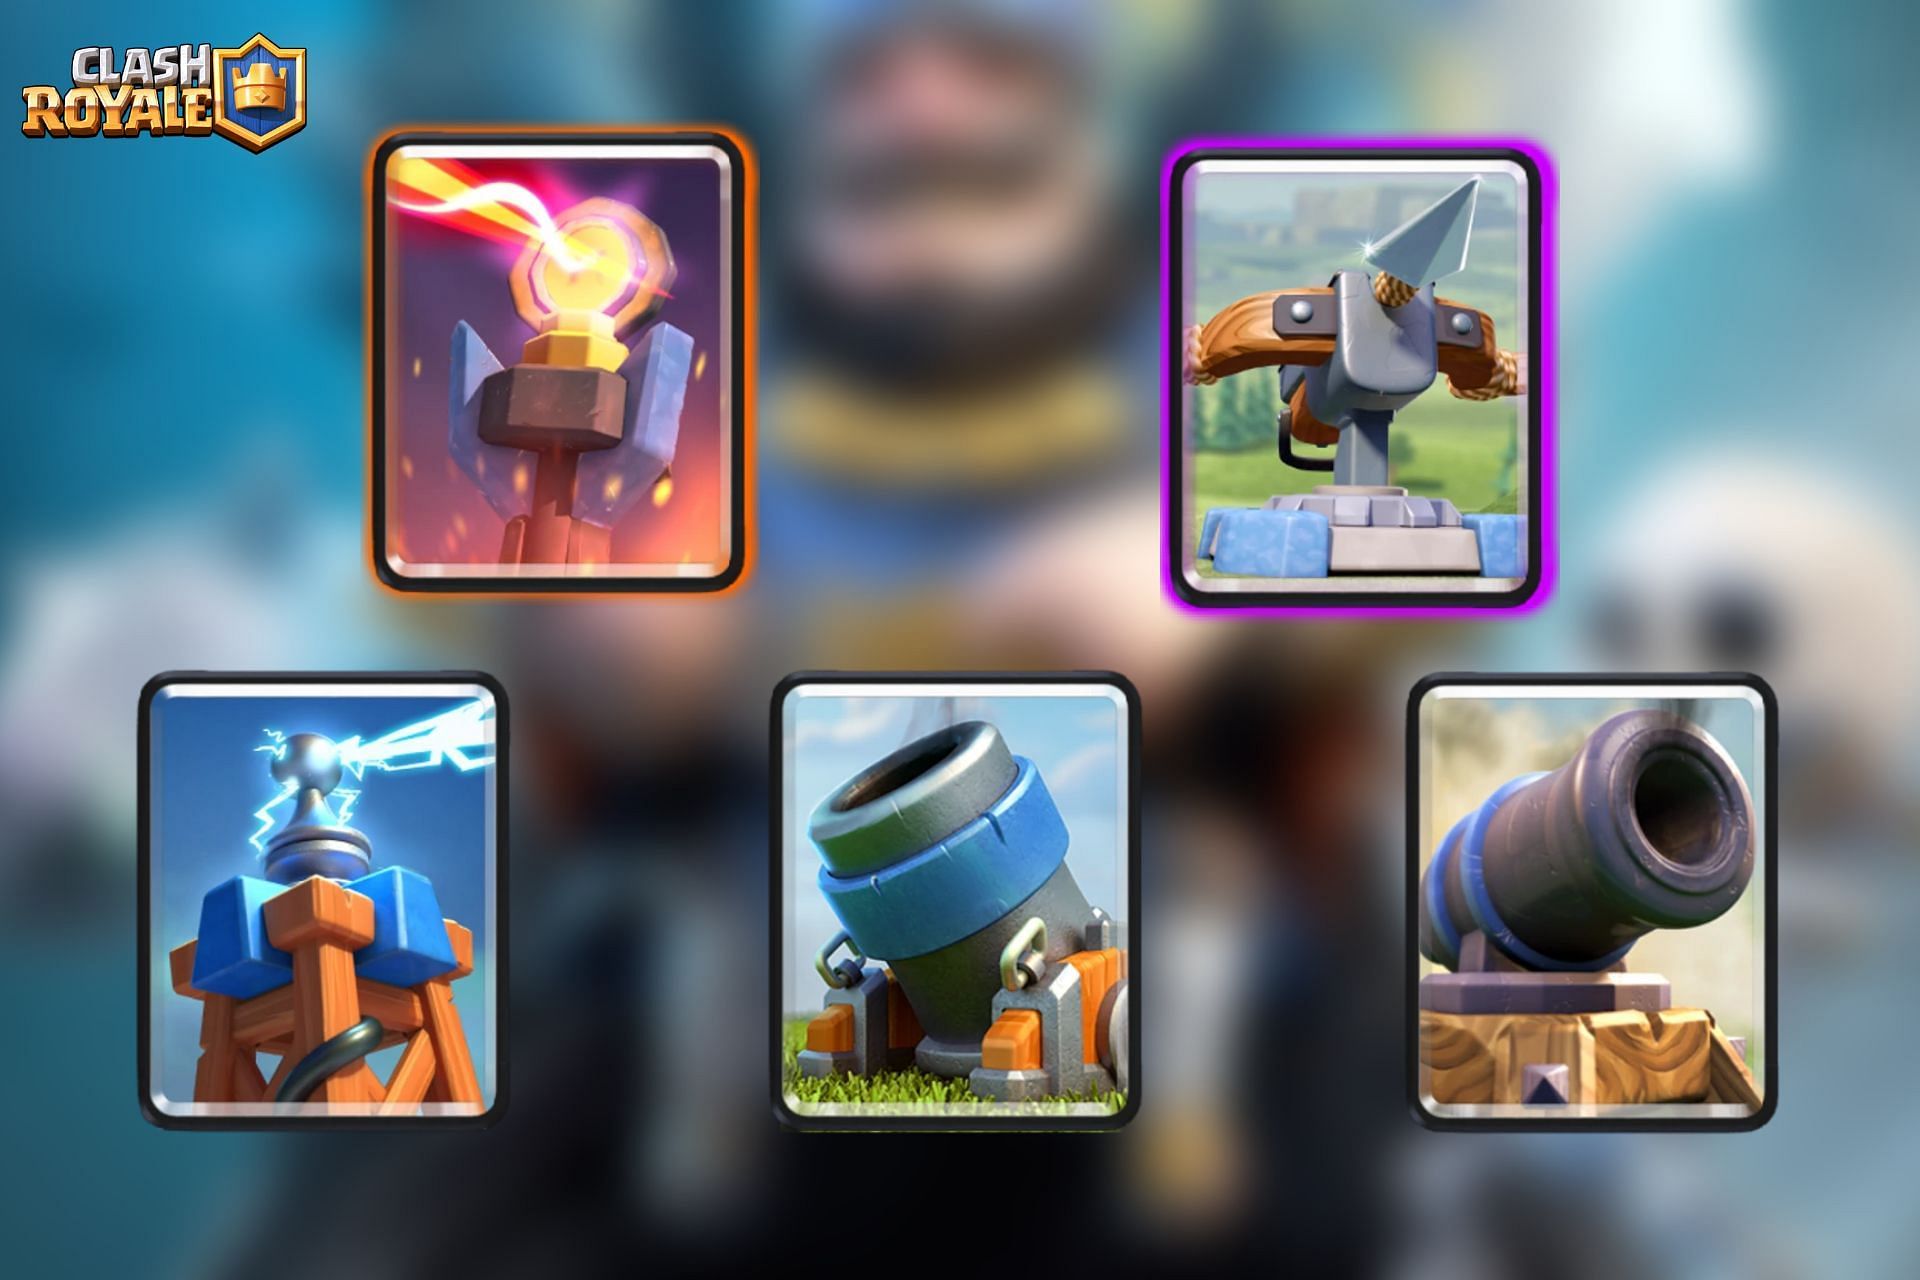 Every Super Card in Clash Royale